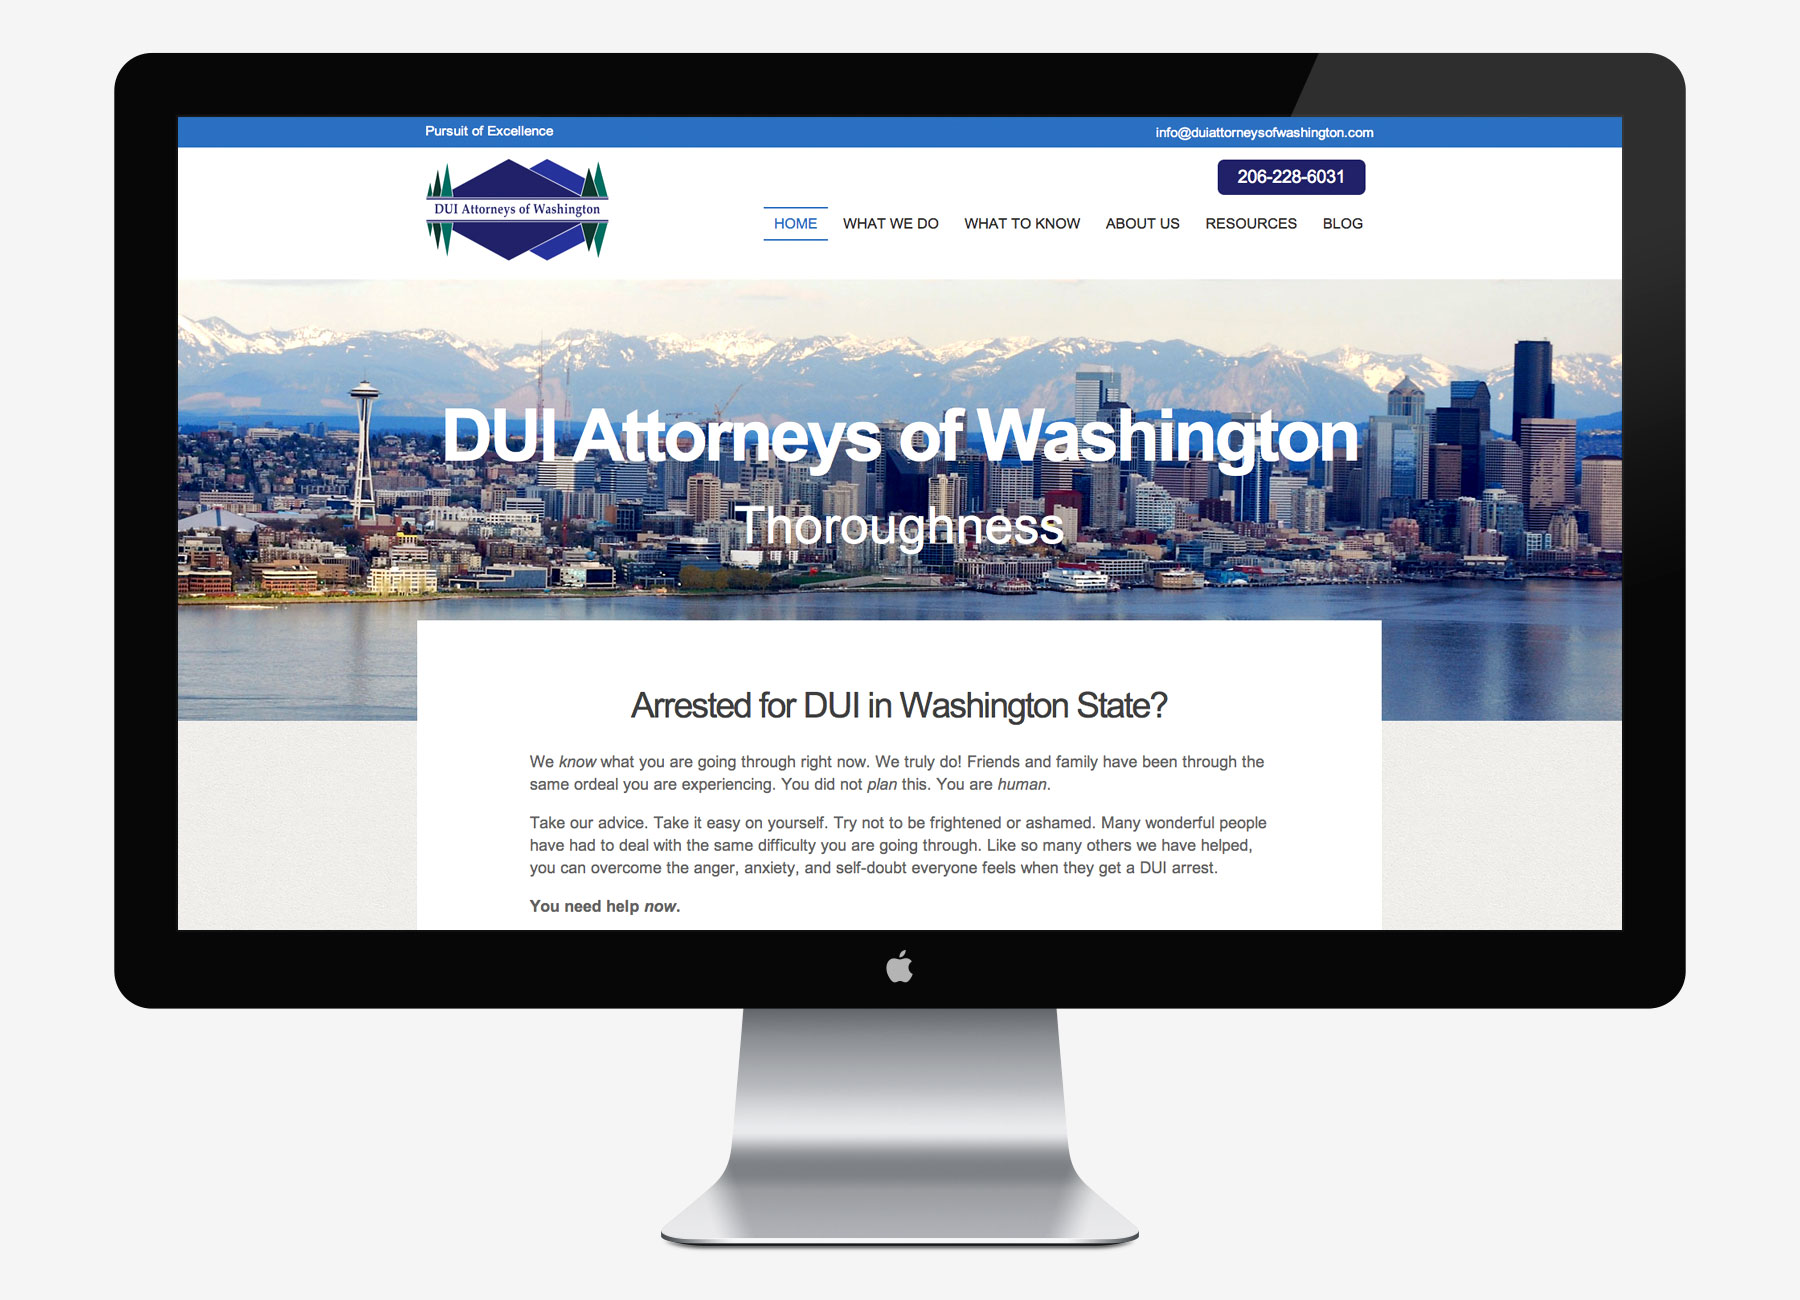 HOW project. DUI Attorneys of Washington.